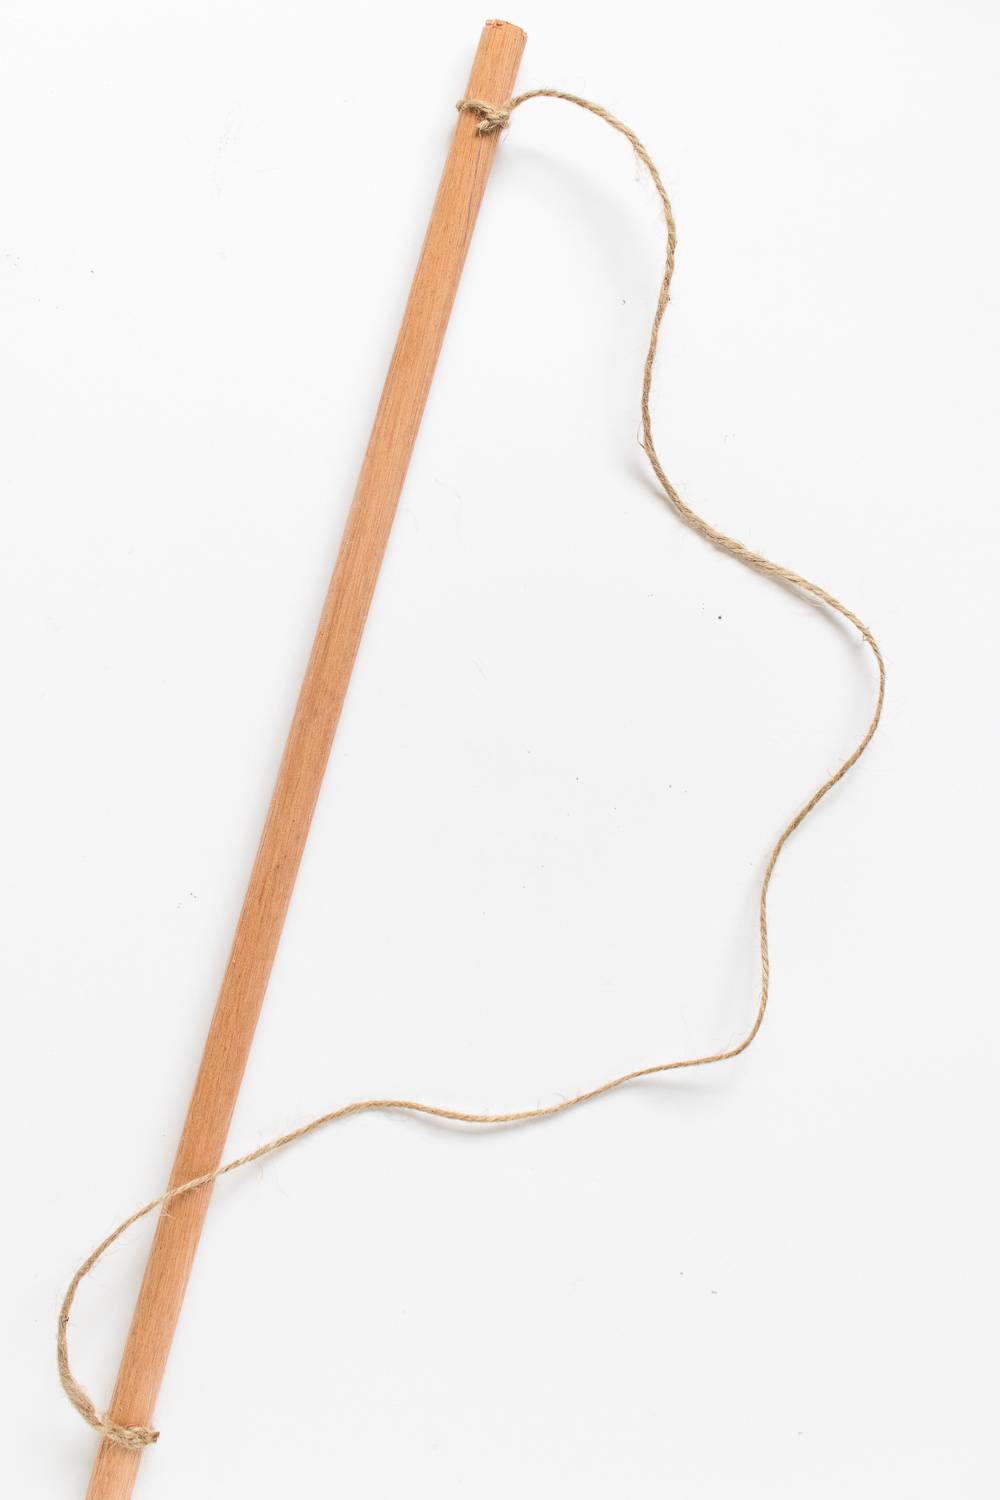 Long thin wooden stick with strings tied to each end of it.